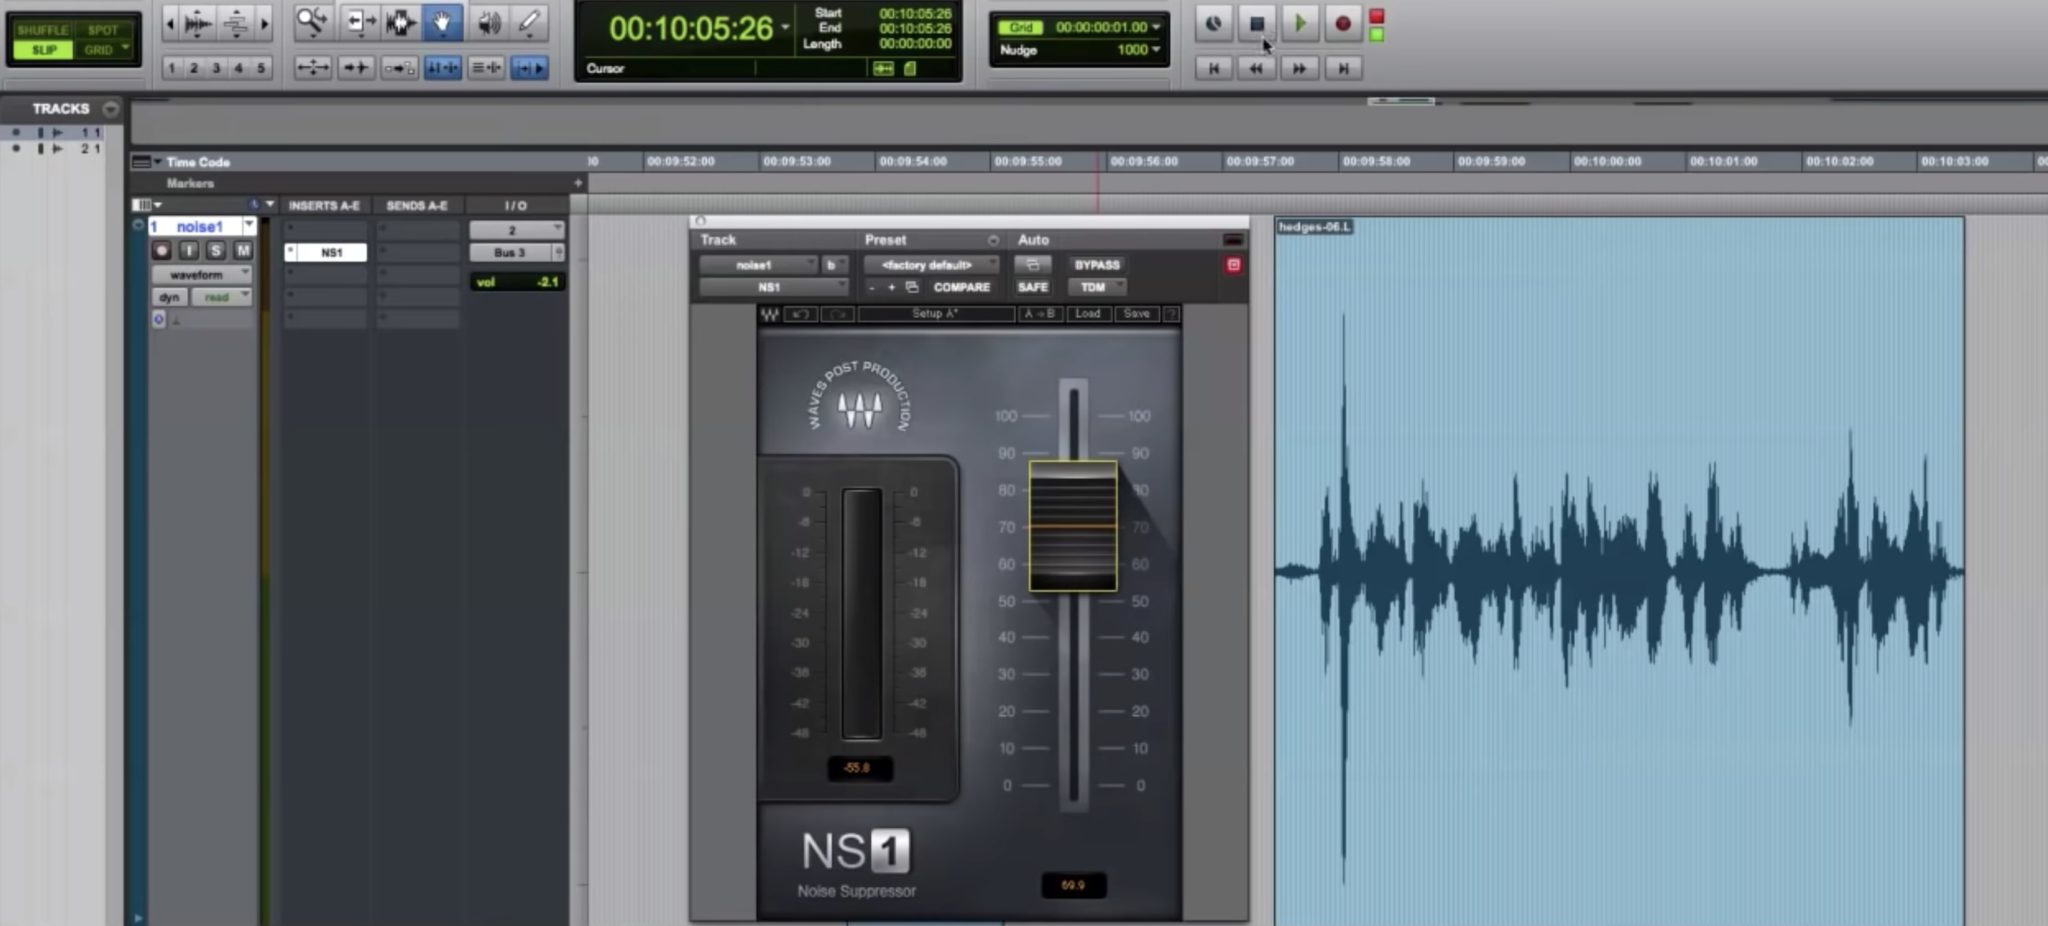 noise reduction plugins for ableton live